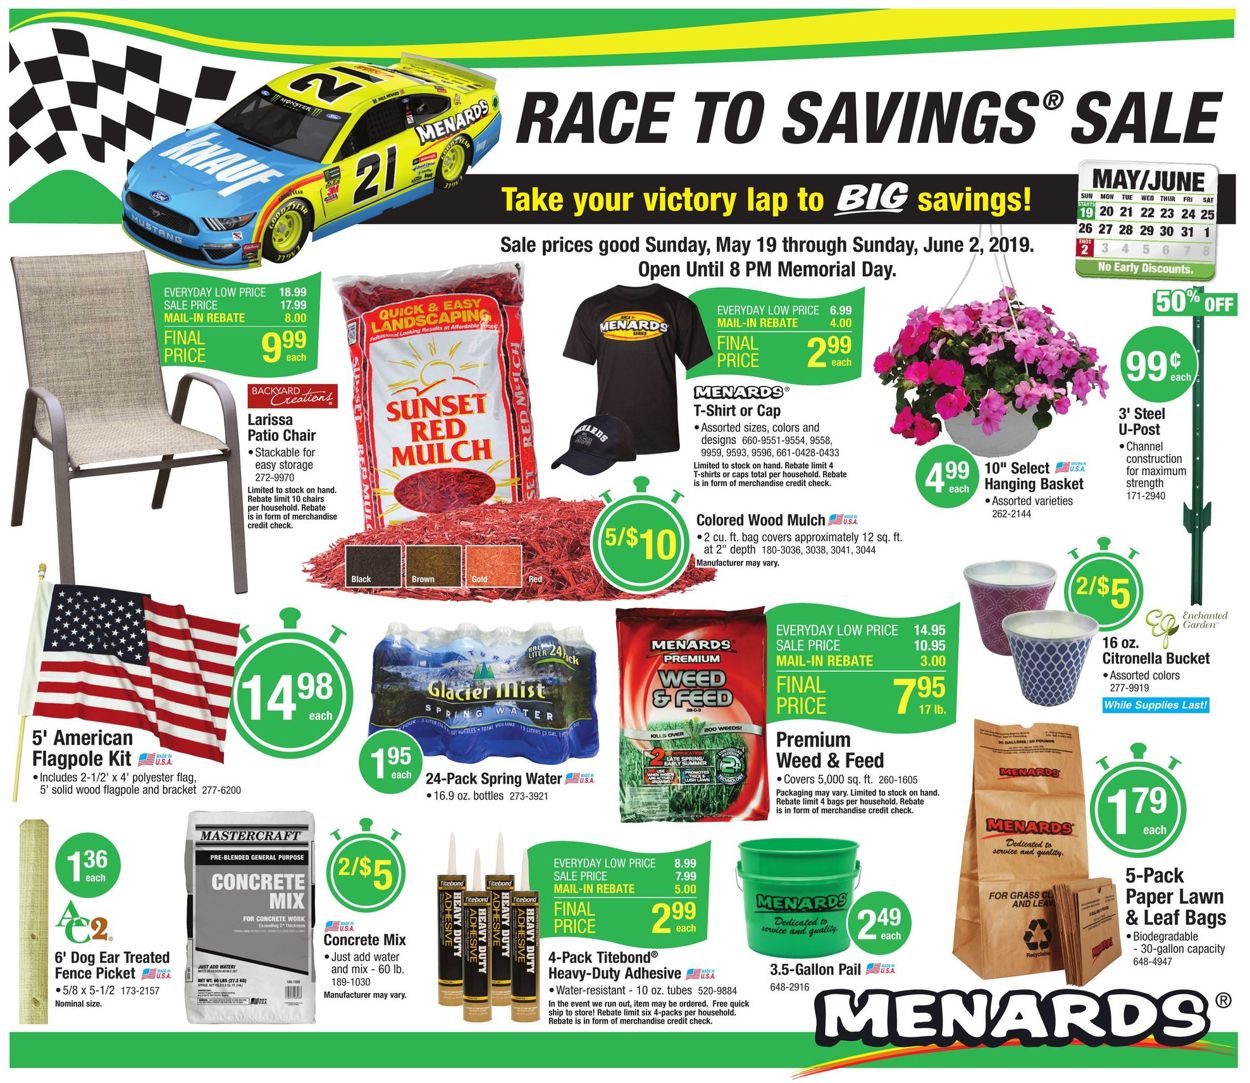 Menards Current weekly ad 05/19 - 06/02/2019 [3] - 0